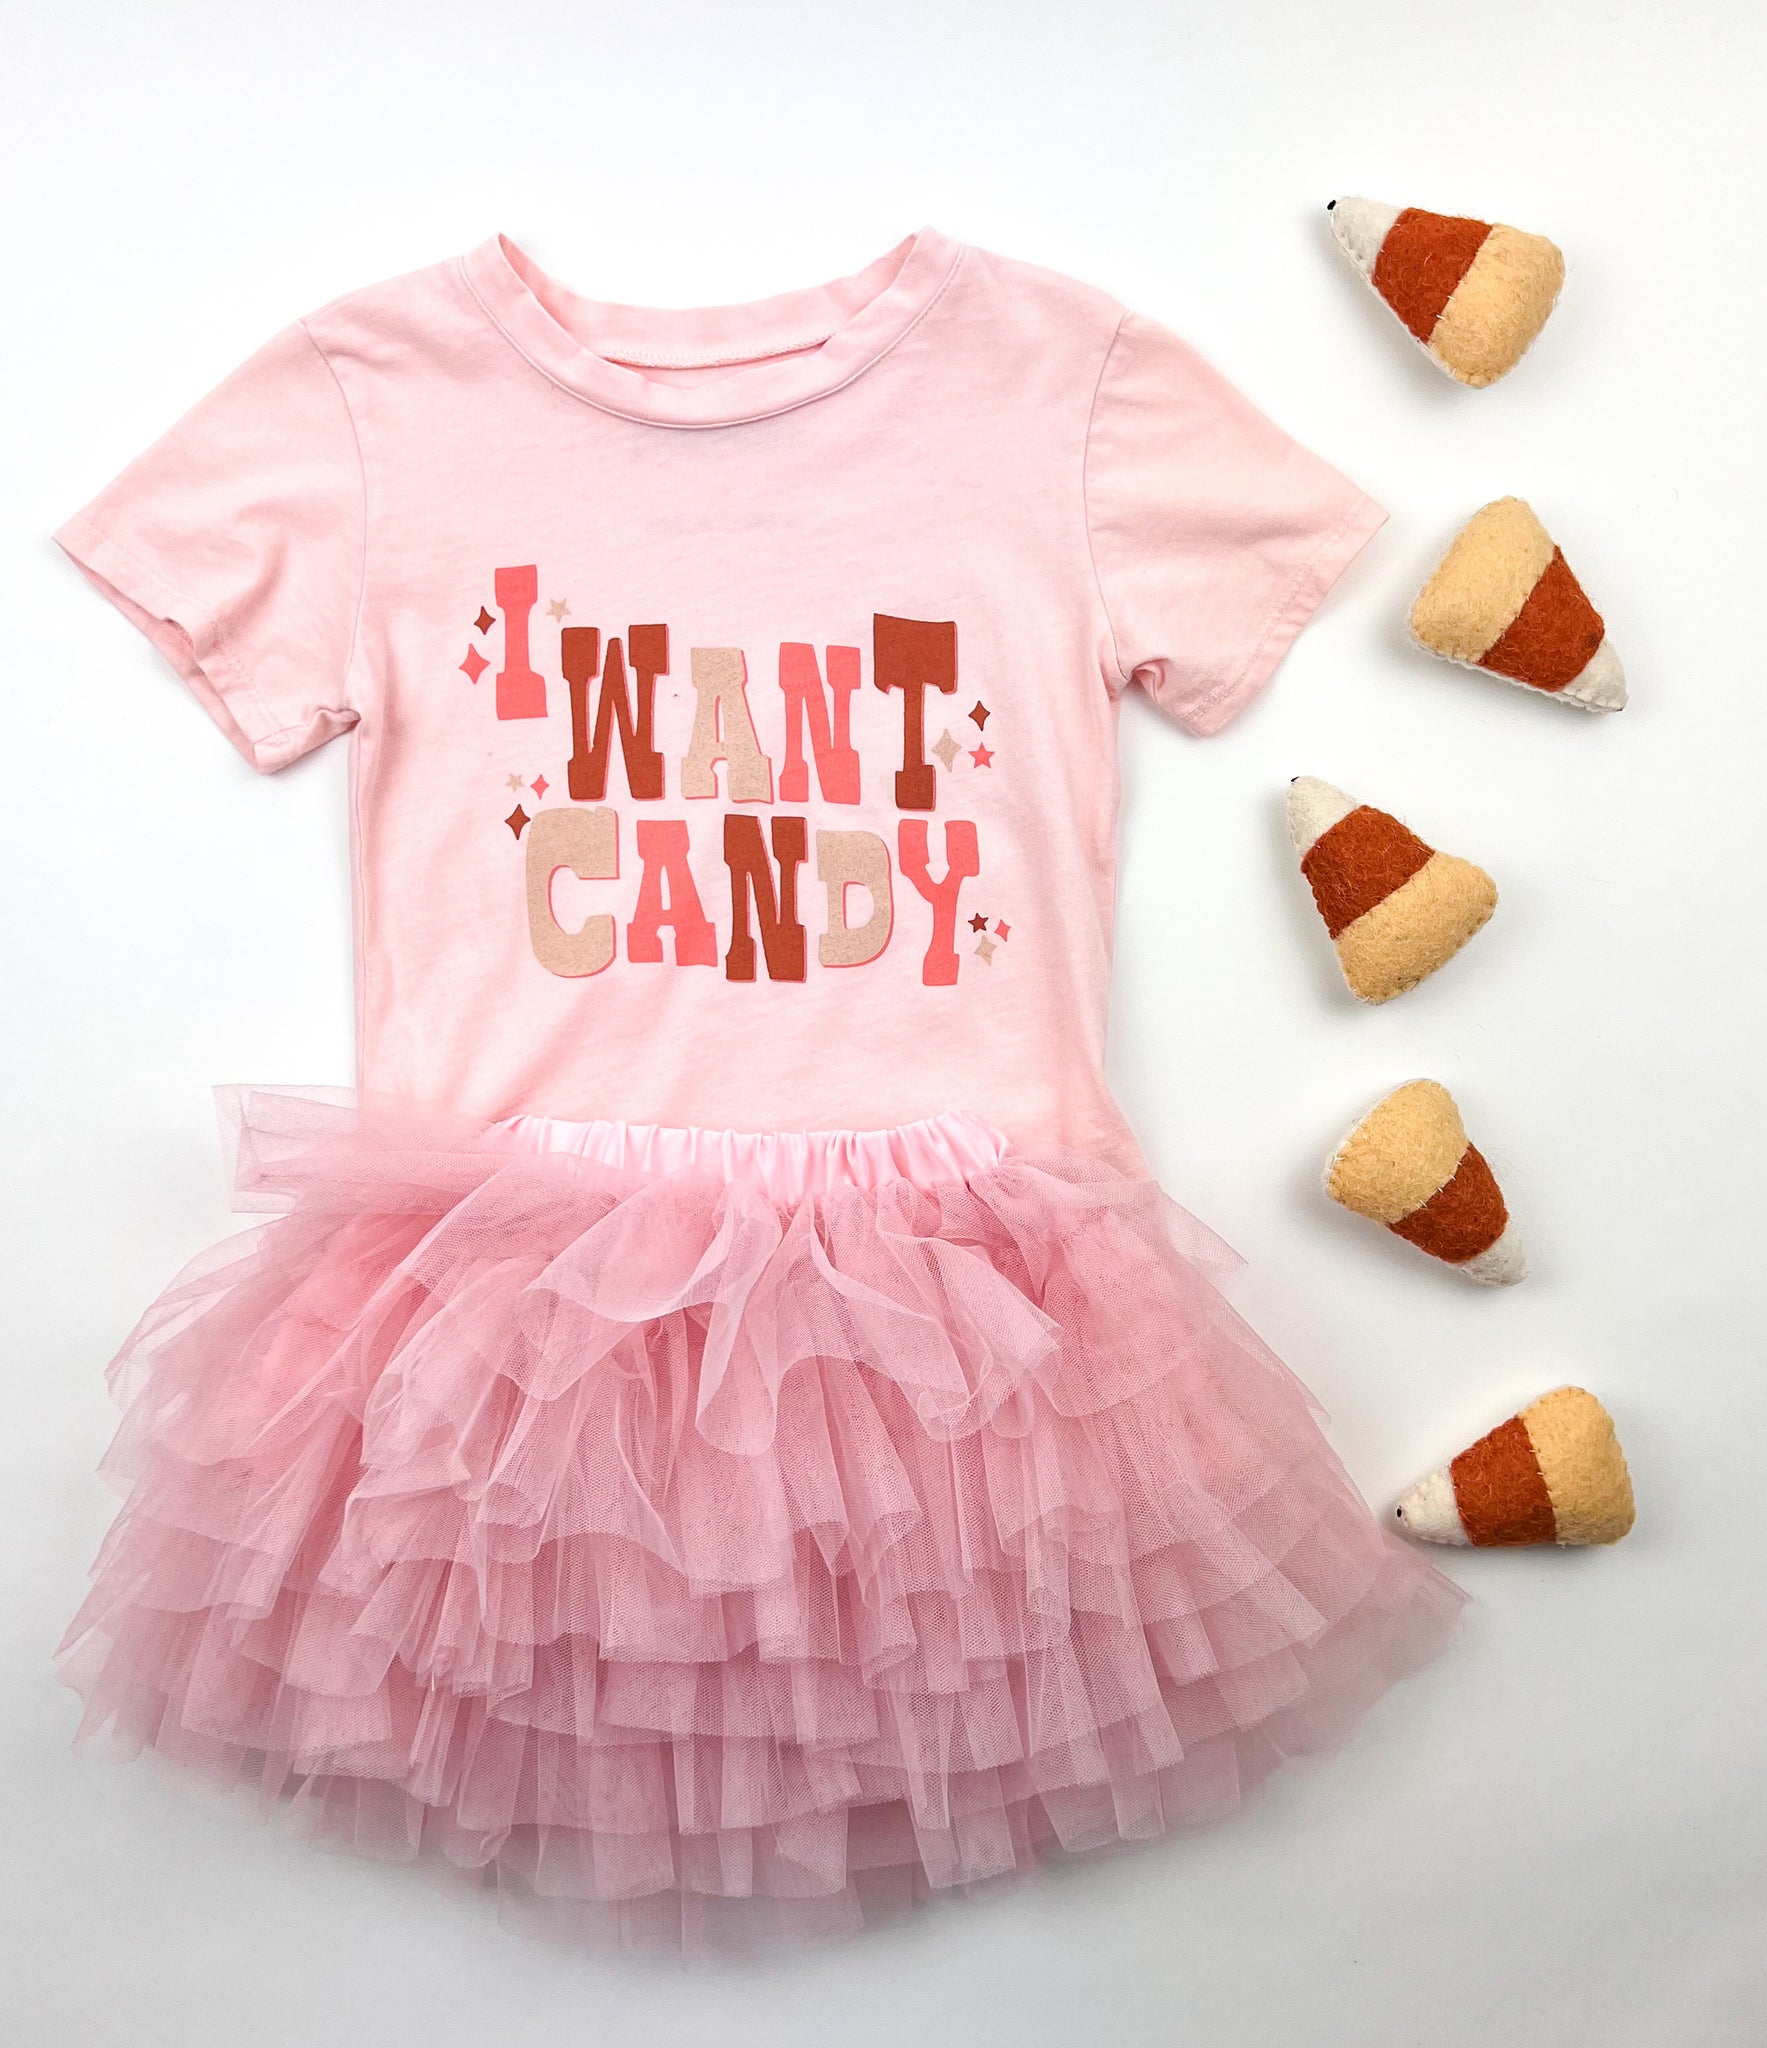 I Want Candy Tee in Peachy Pink